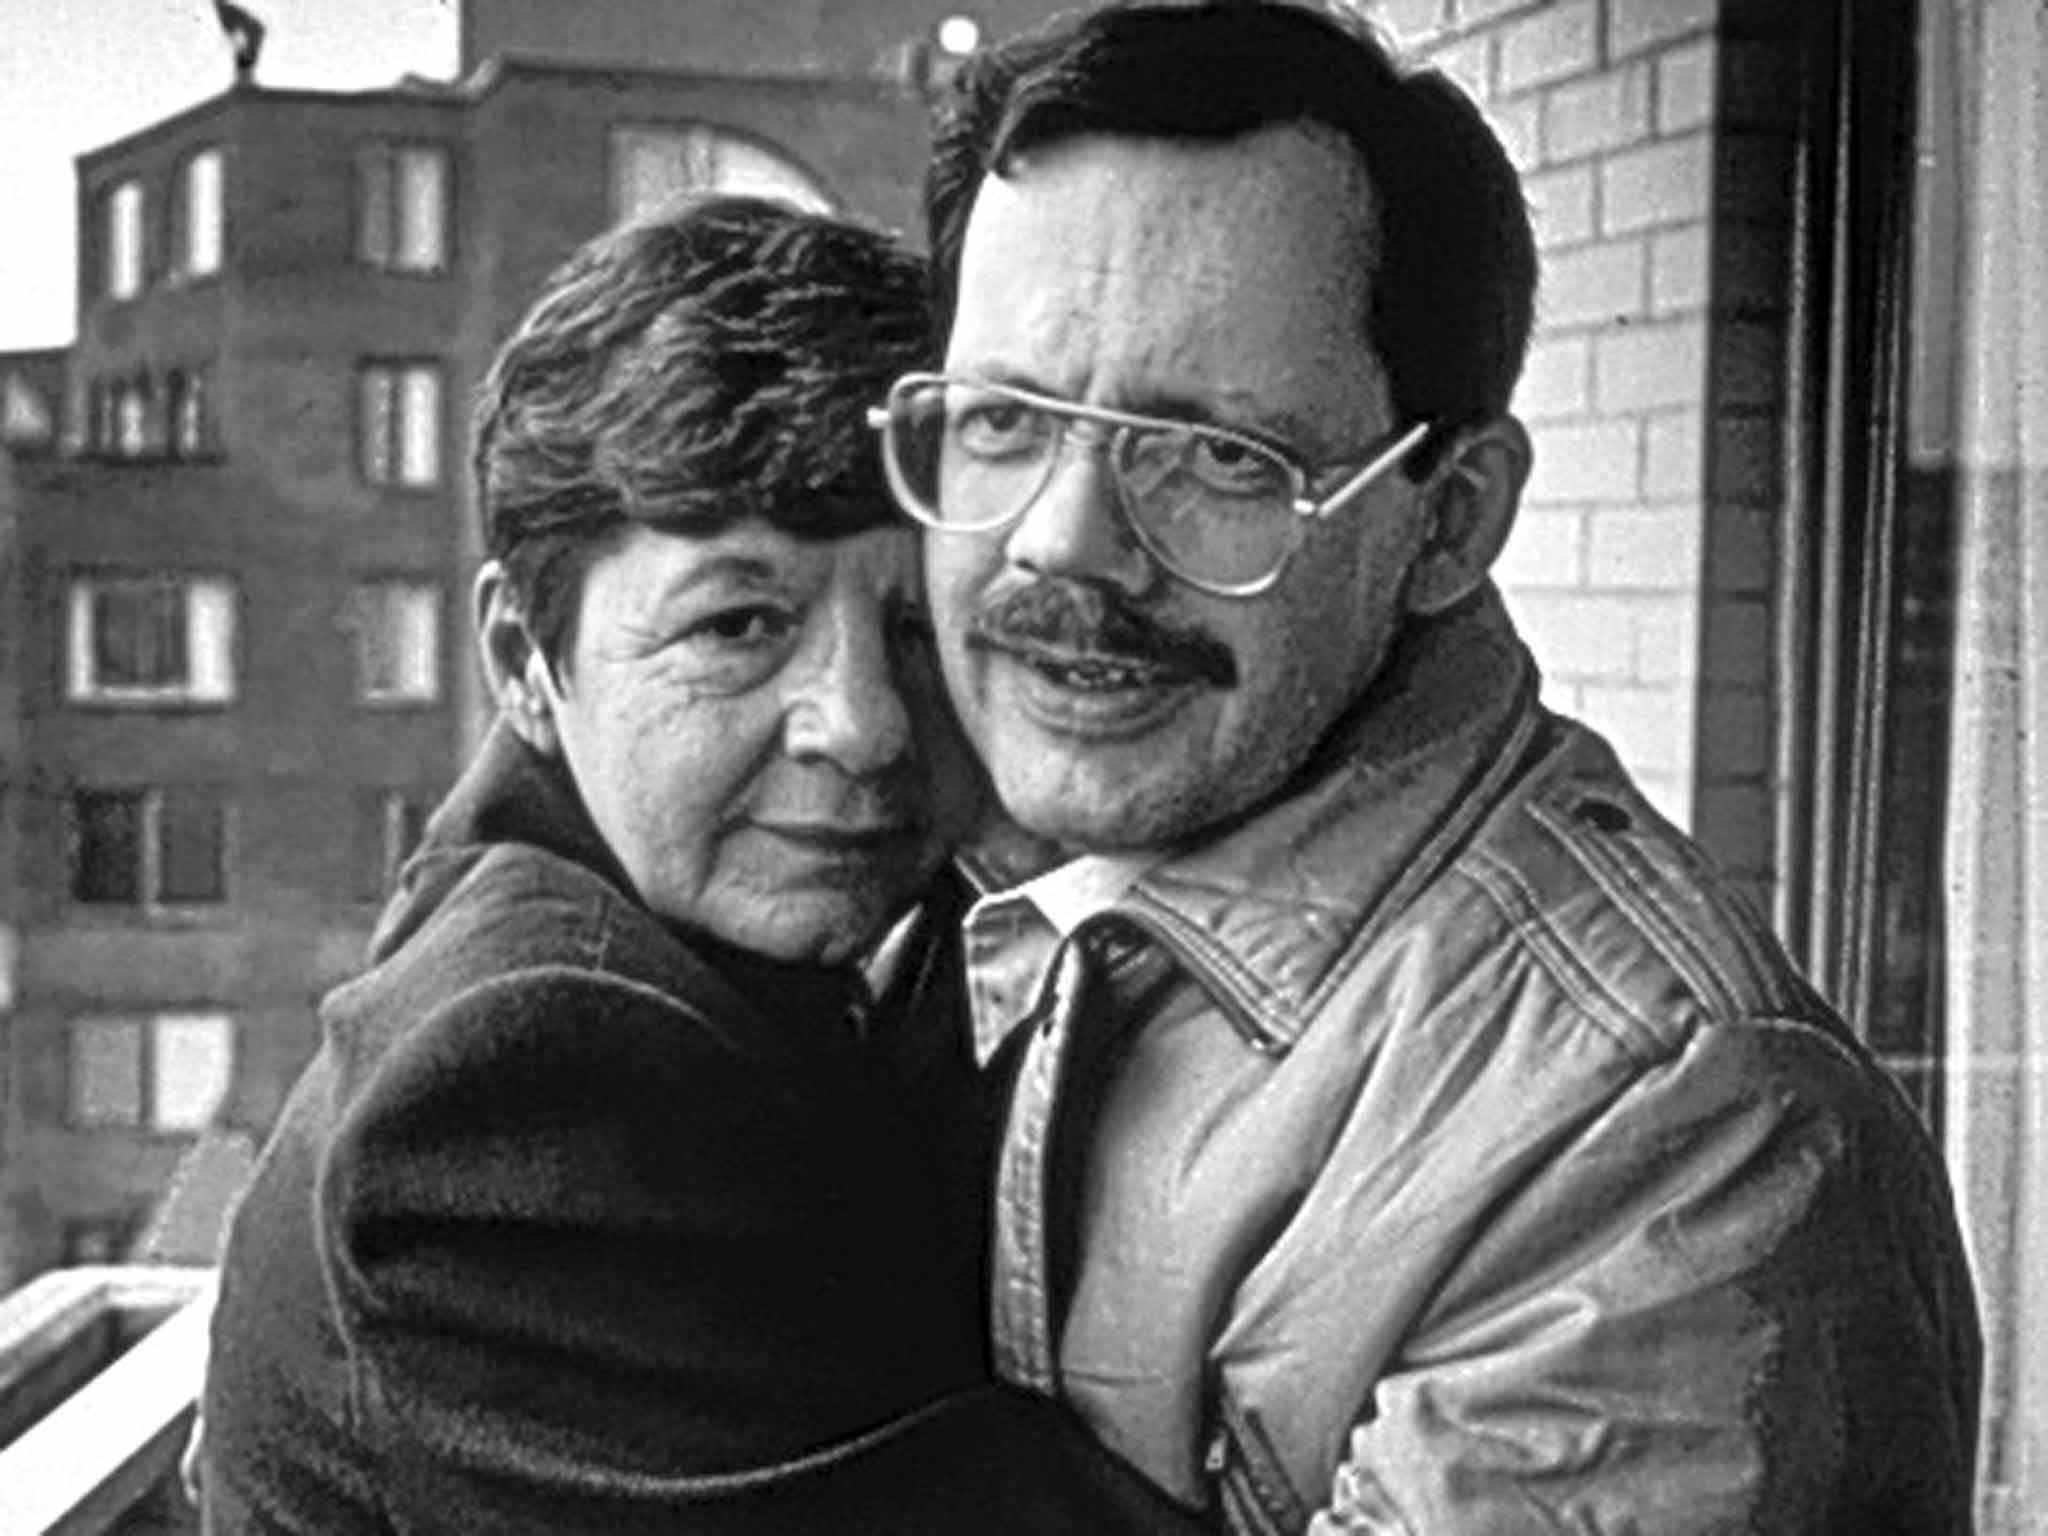 Say with her brother Terry Anderson following his release in 1991